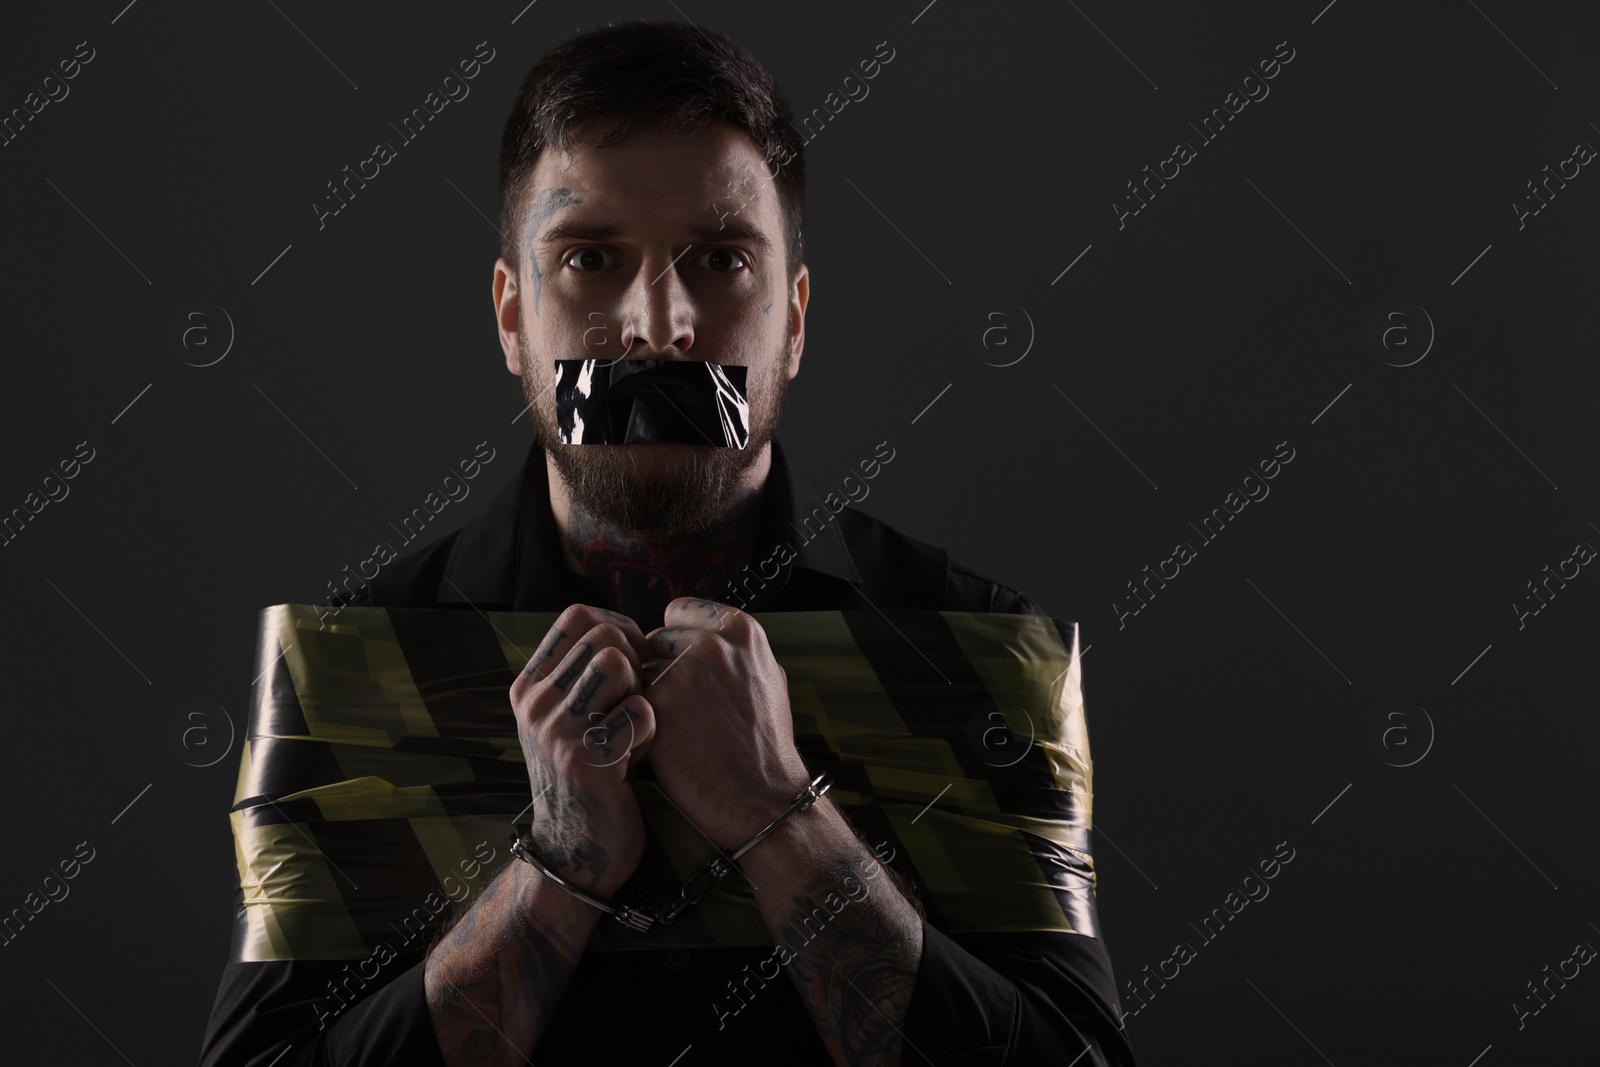 Photo of Man taped up and taken hostage on dark background. Space for text